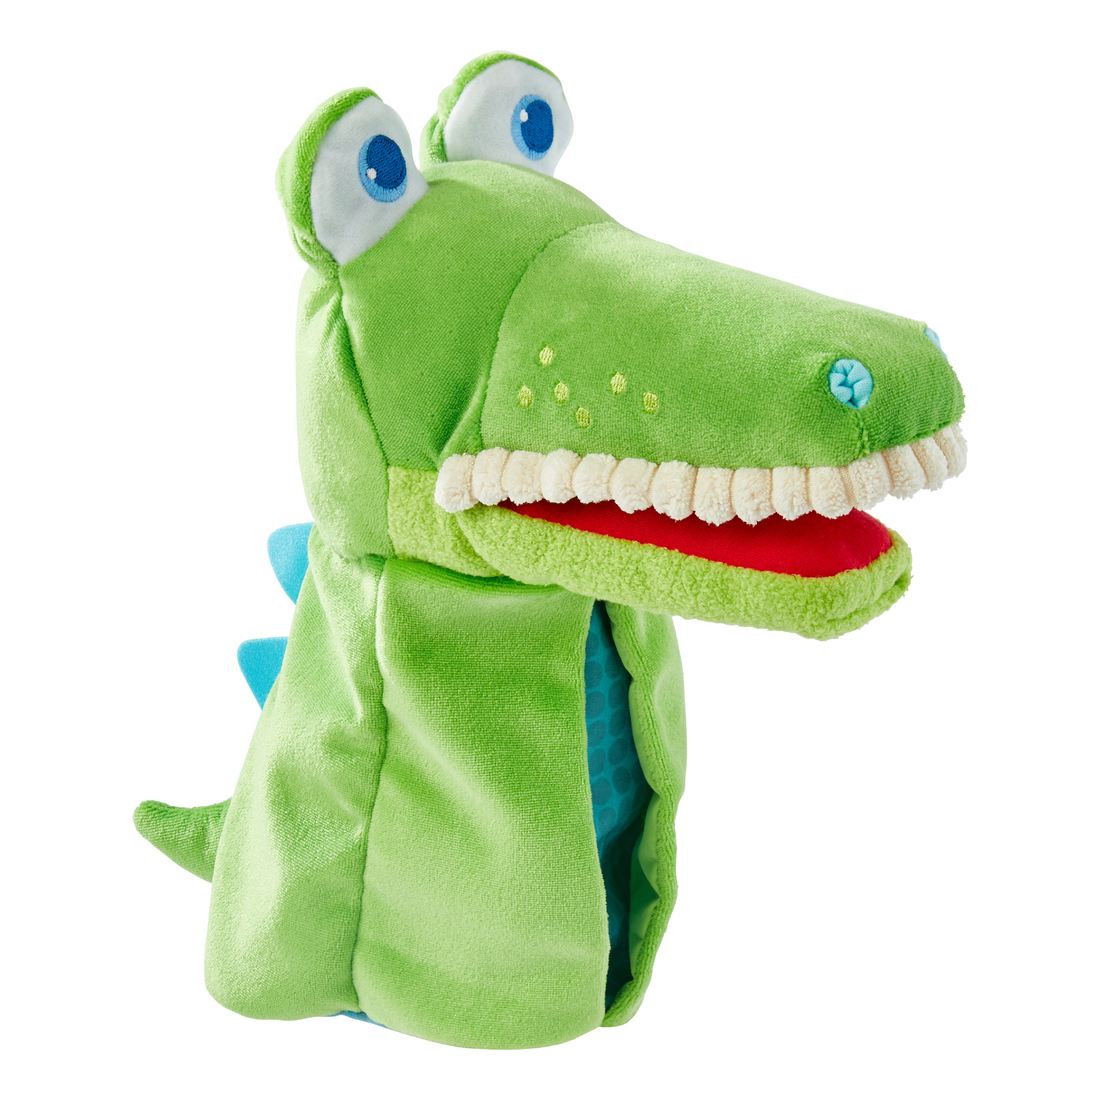 Eat-It-Up Croco - hand puppet for babies by HABA